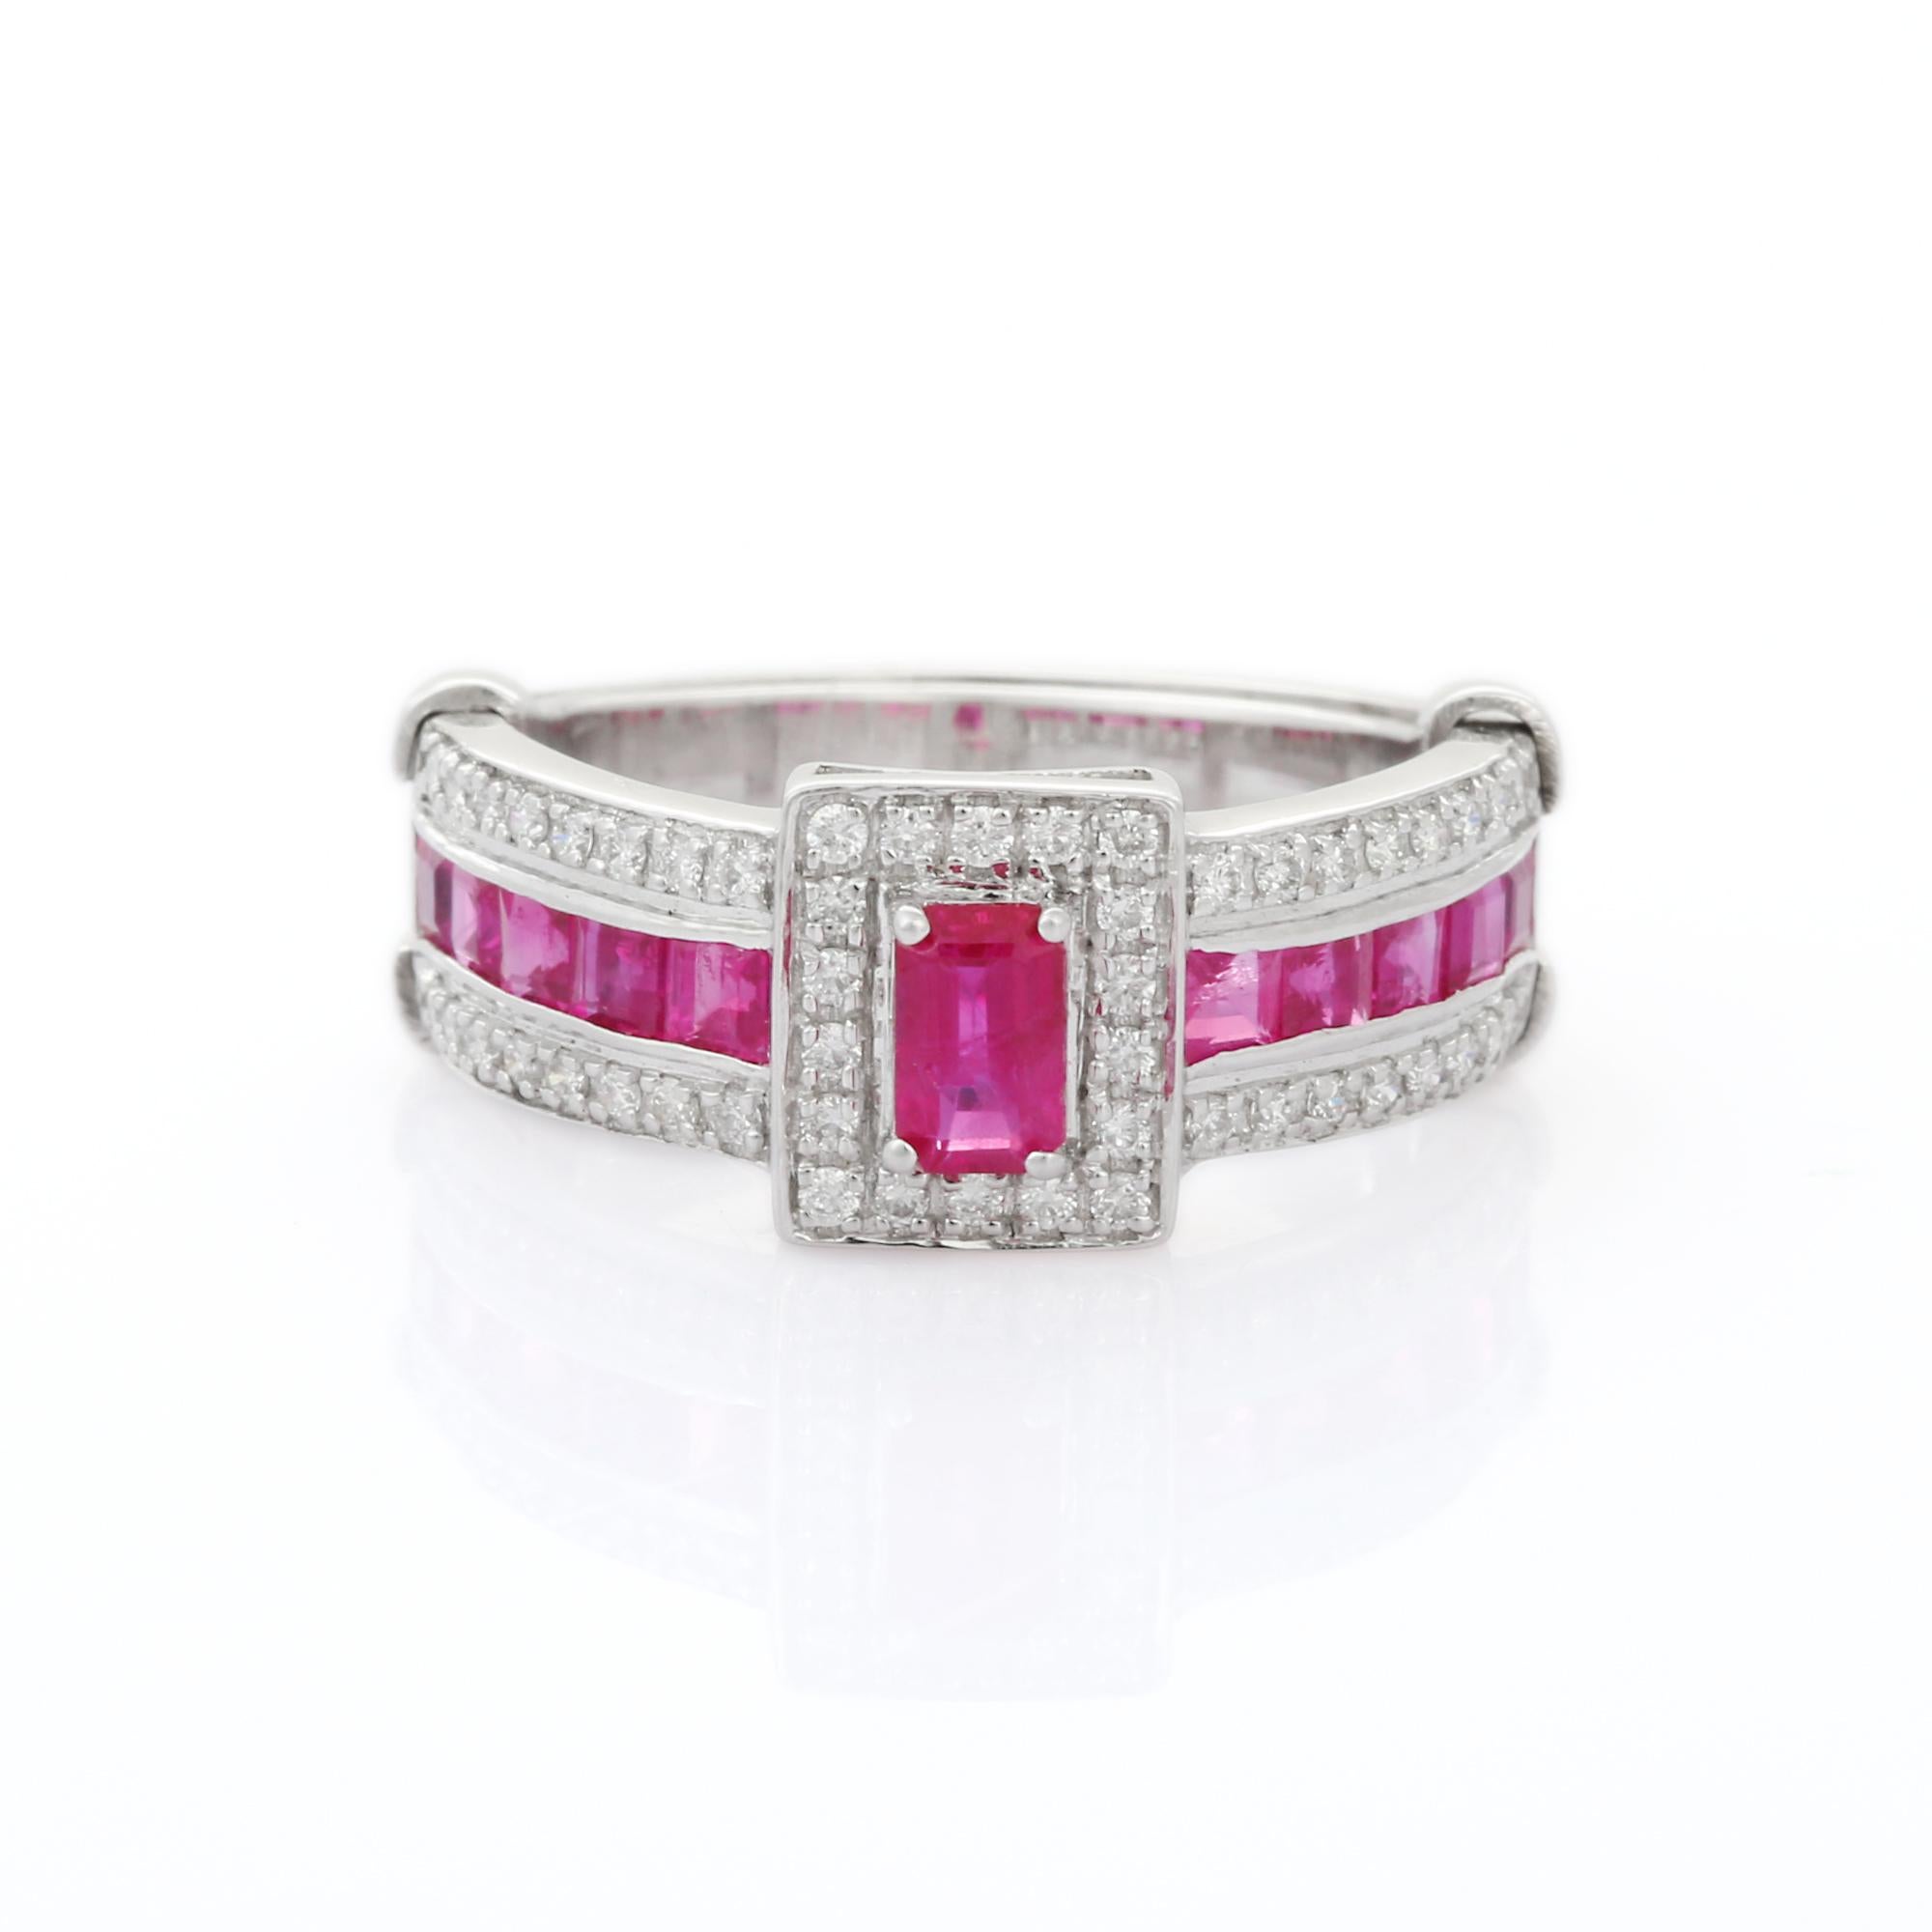 For Sale:  Prong Set Ruby Cluster Ring in 14K White Gold with Diamonds    15